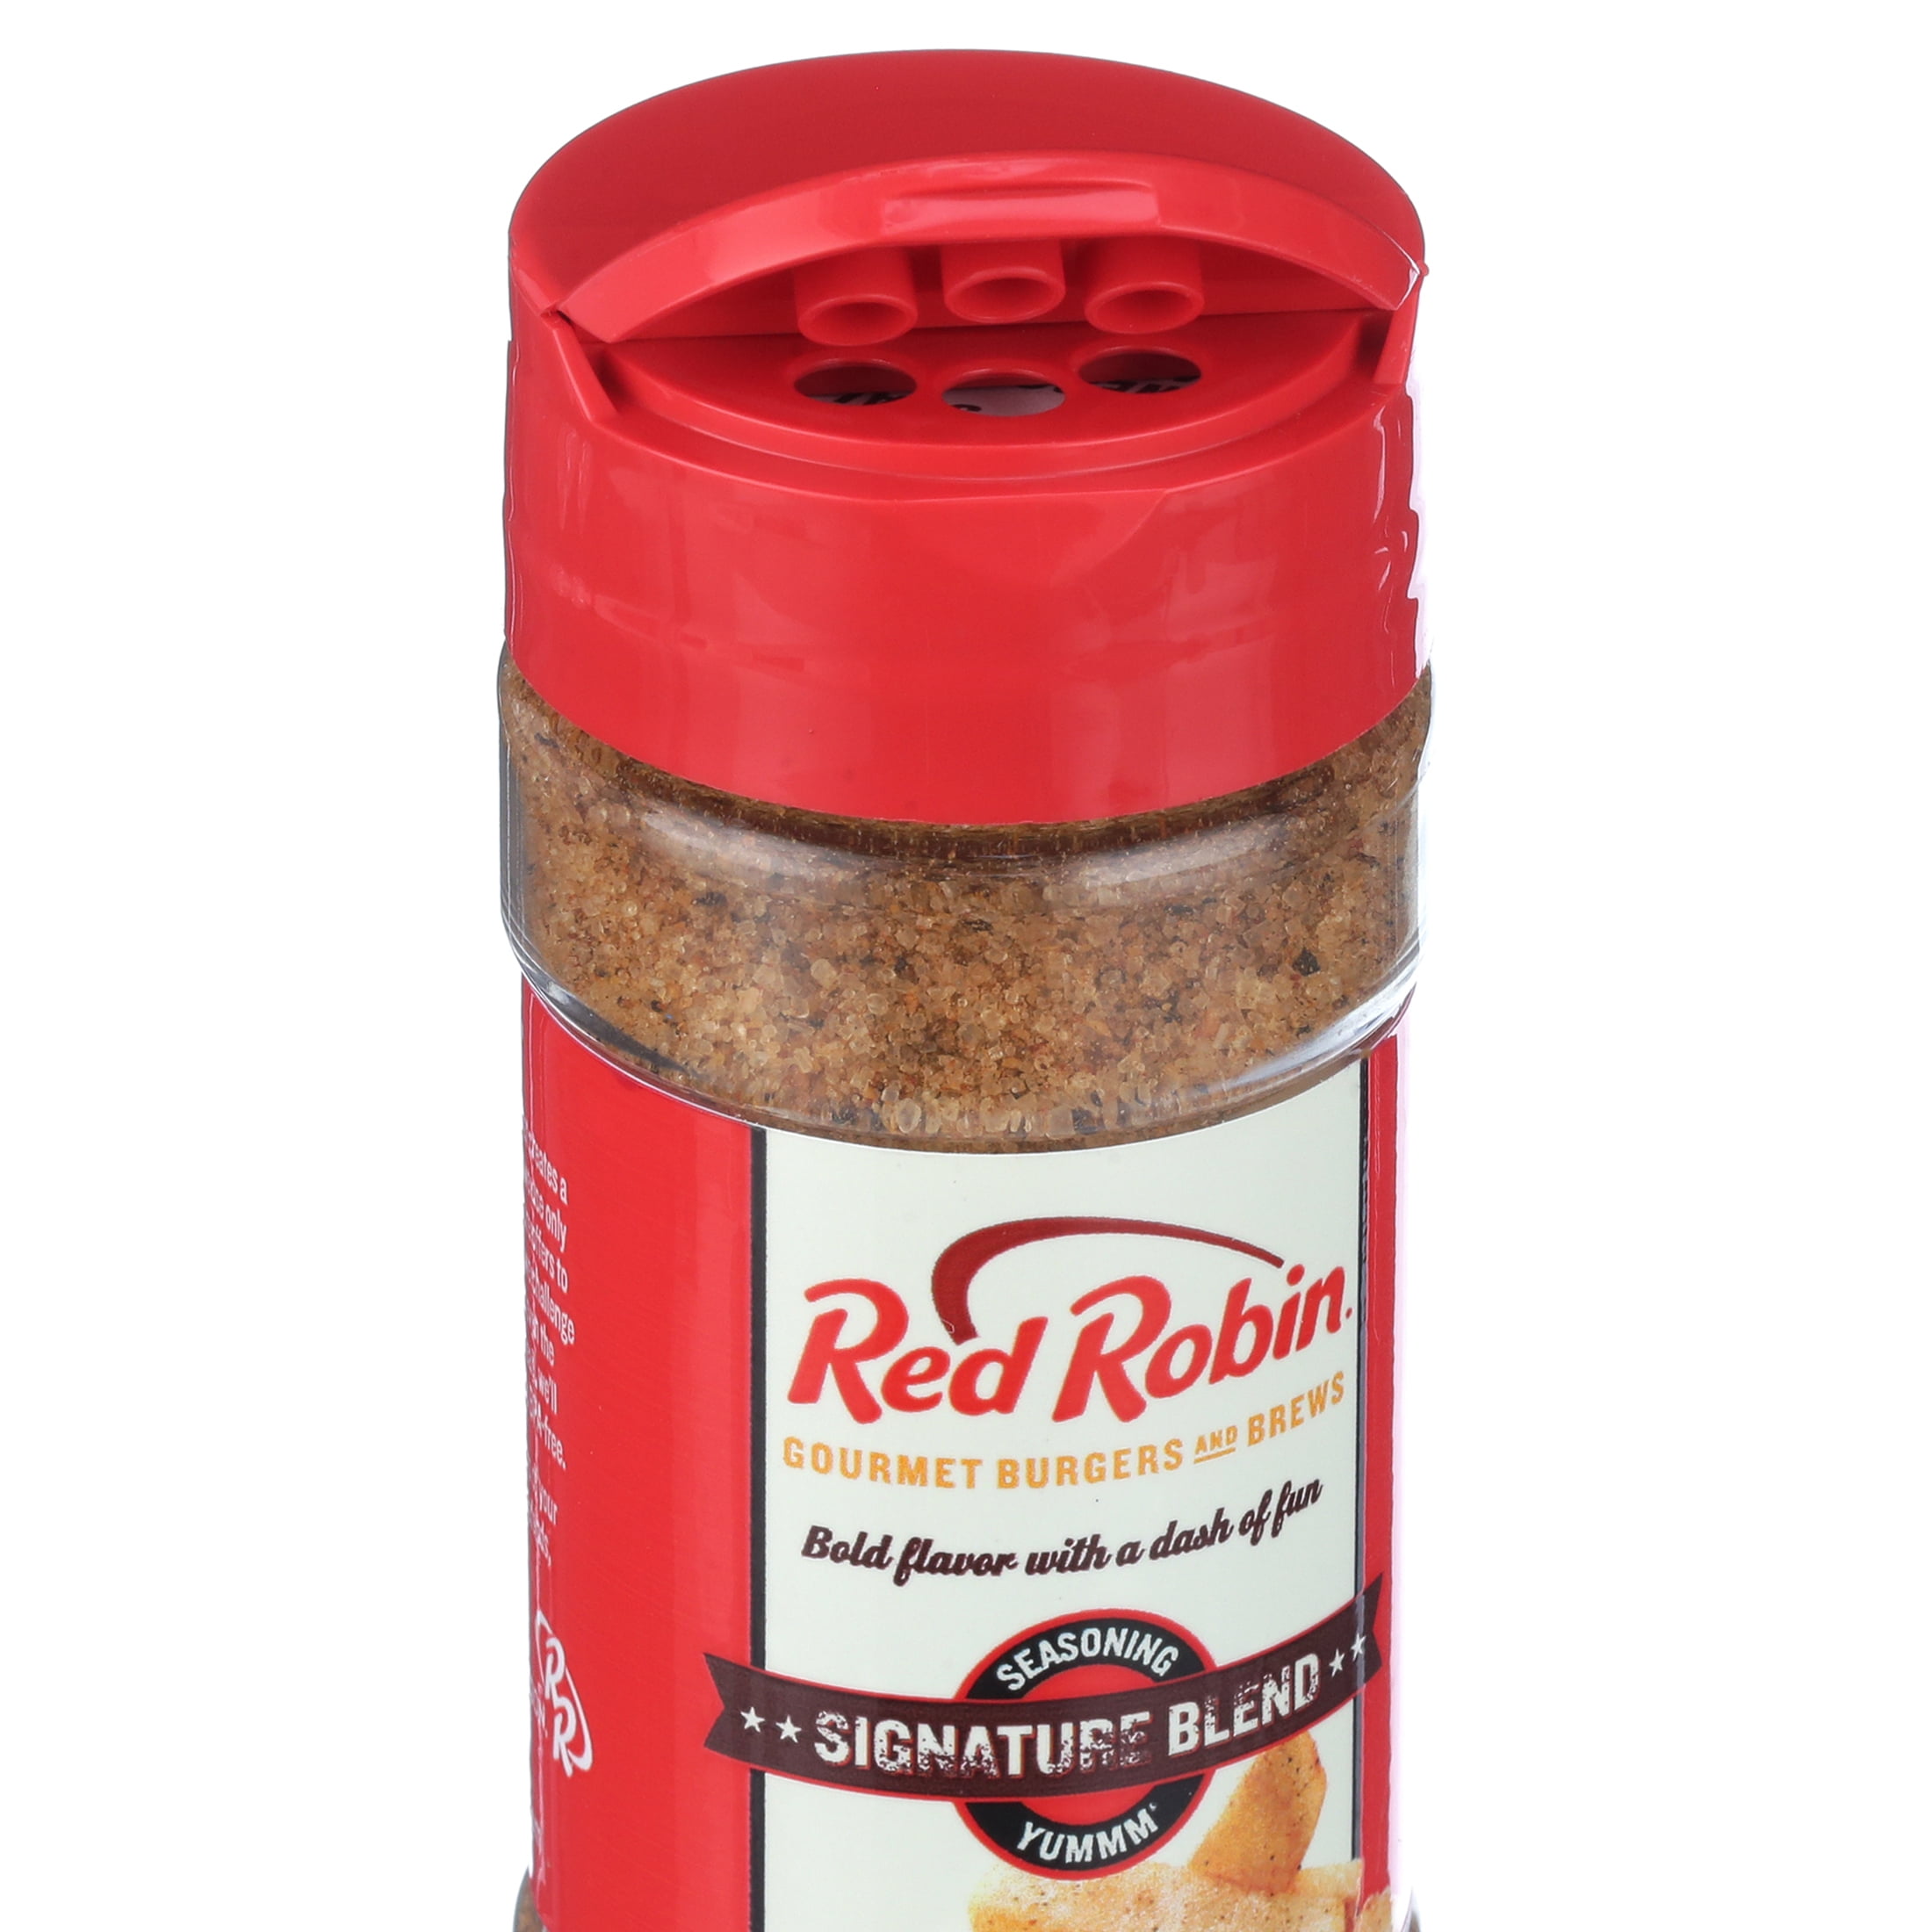 RED ROBIN'S ALL NATURAL ORIG. SEASONING LOT OF 55 = 4 oz PACKETS